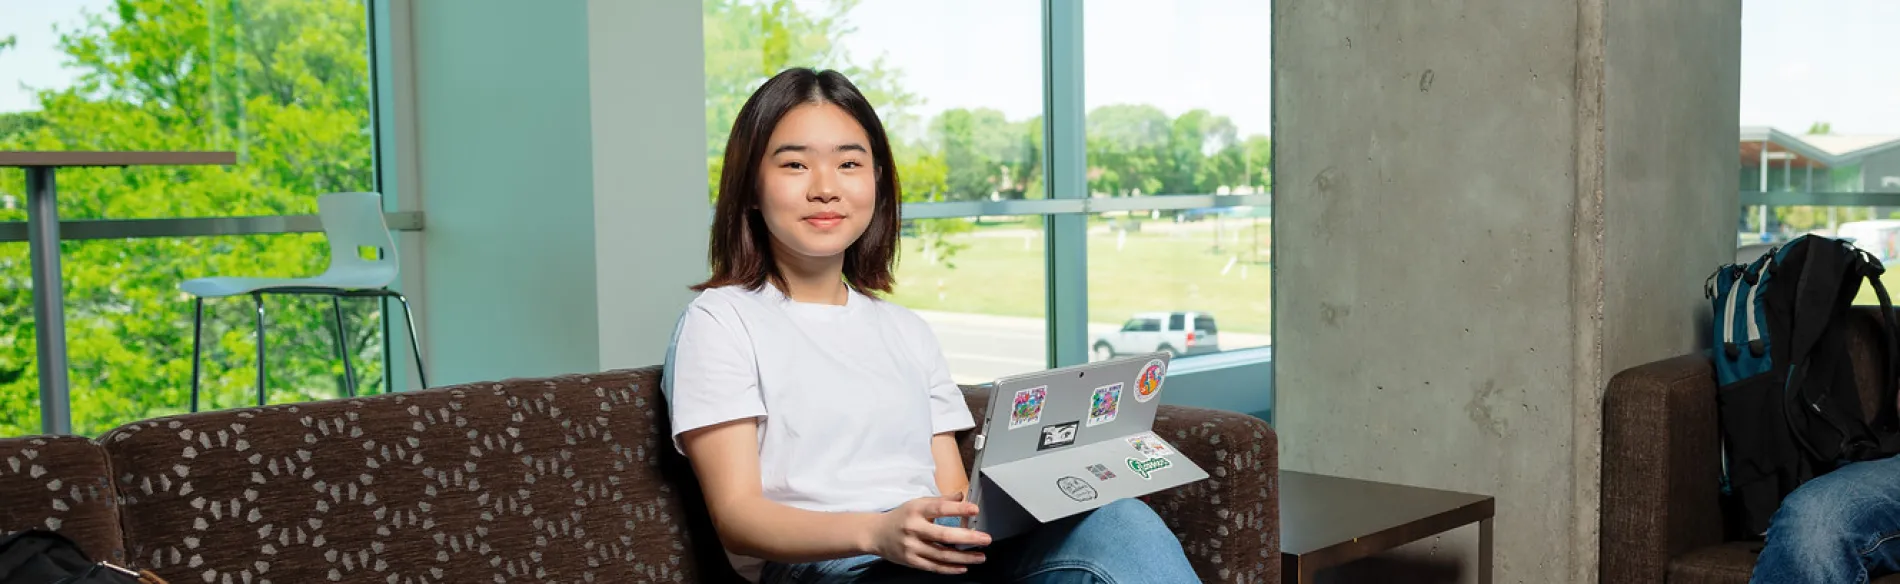 student on a laptop sitting on a couch